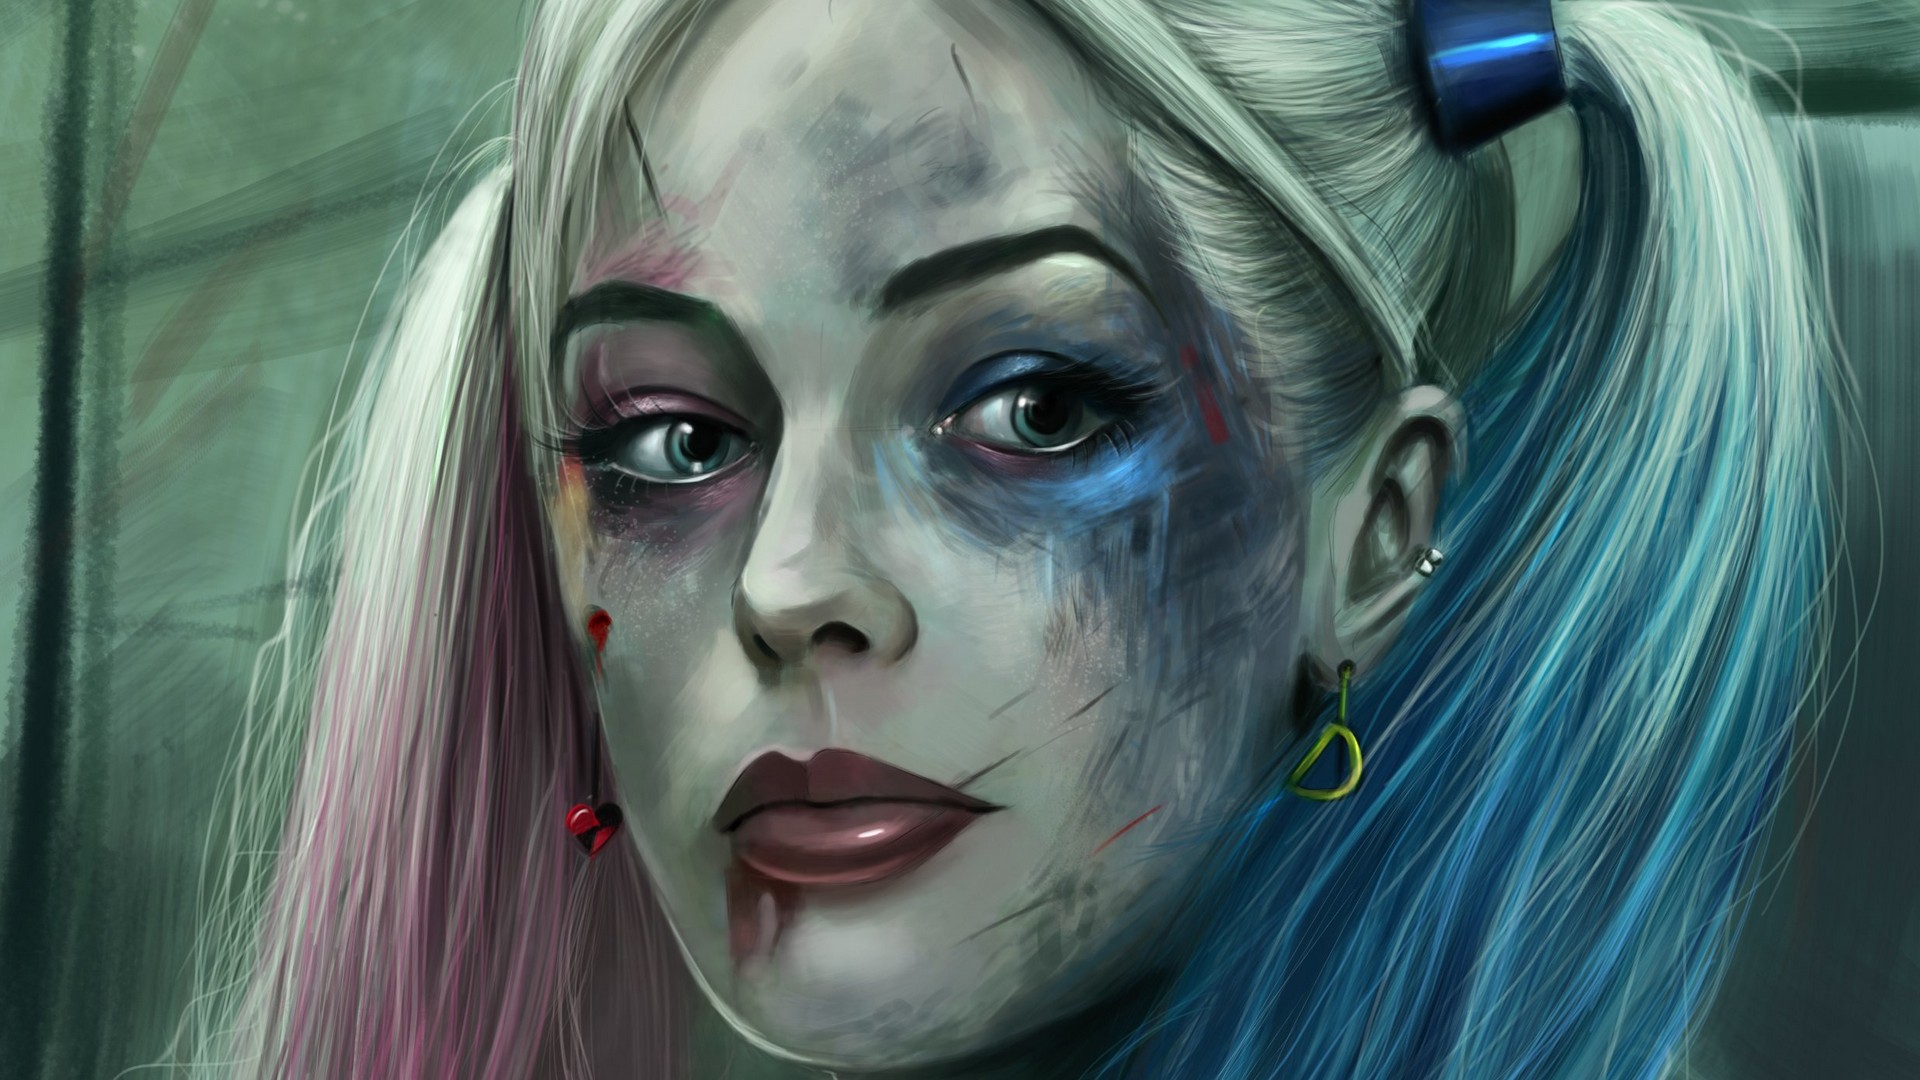 Harley Quinn Makeup Desktop Wallpaper with resolution 1920X1080 pixel. You can use this wallpaper as background for your desktop Computer Screensavers, Android or iPhone smartphones